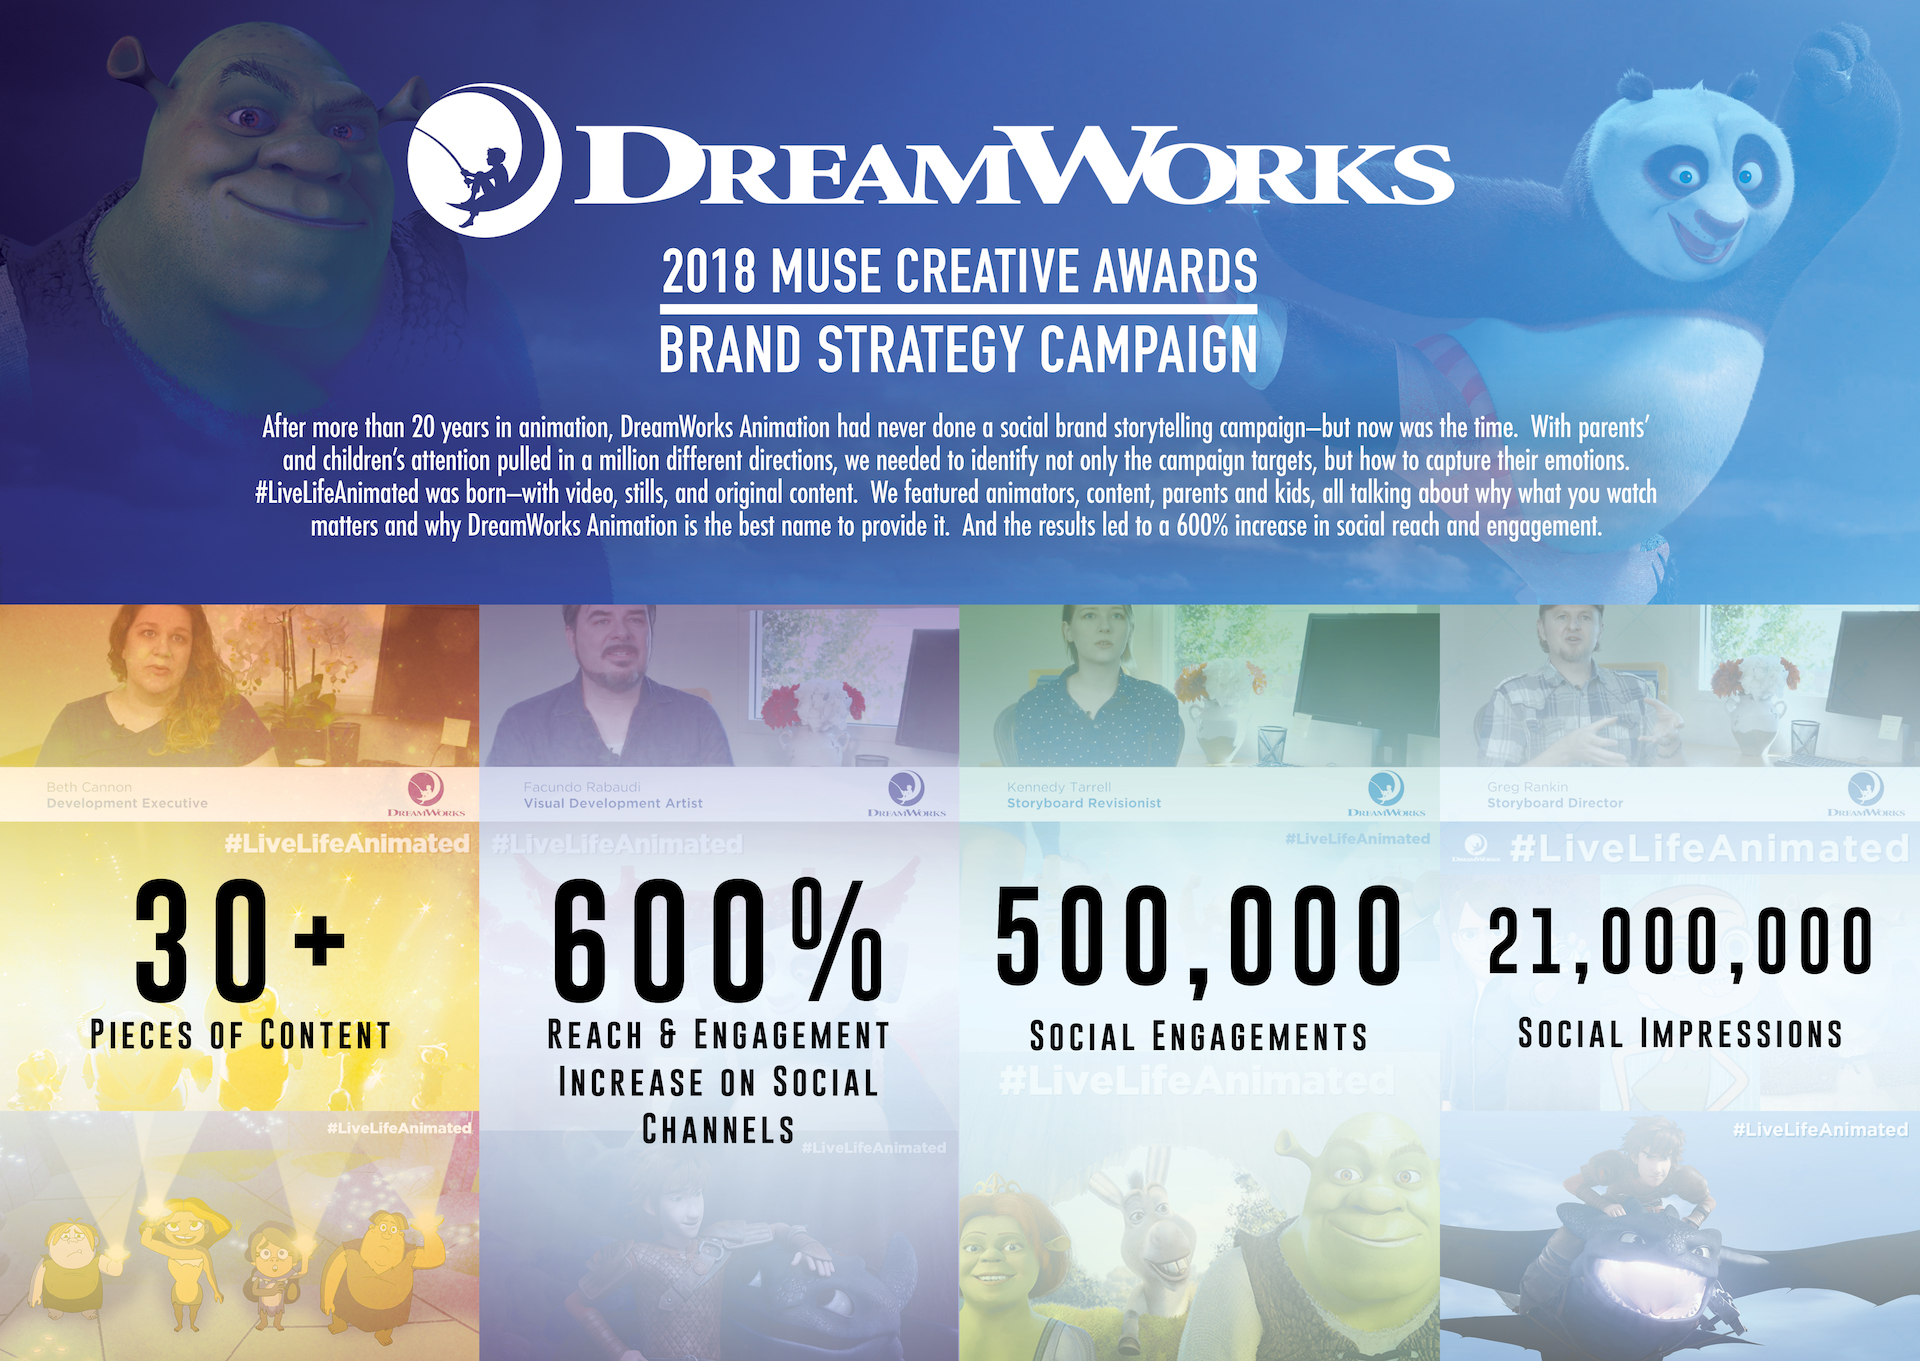 MUSE Advertising Awards - DreamWorks Animation #LiveLifeAnimated Campaign